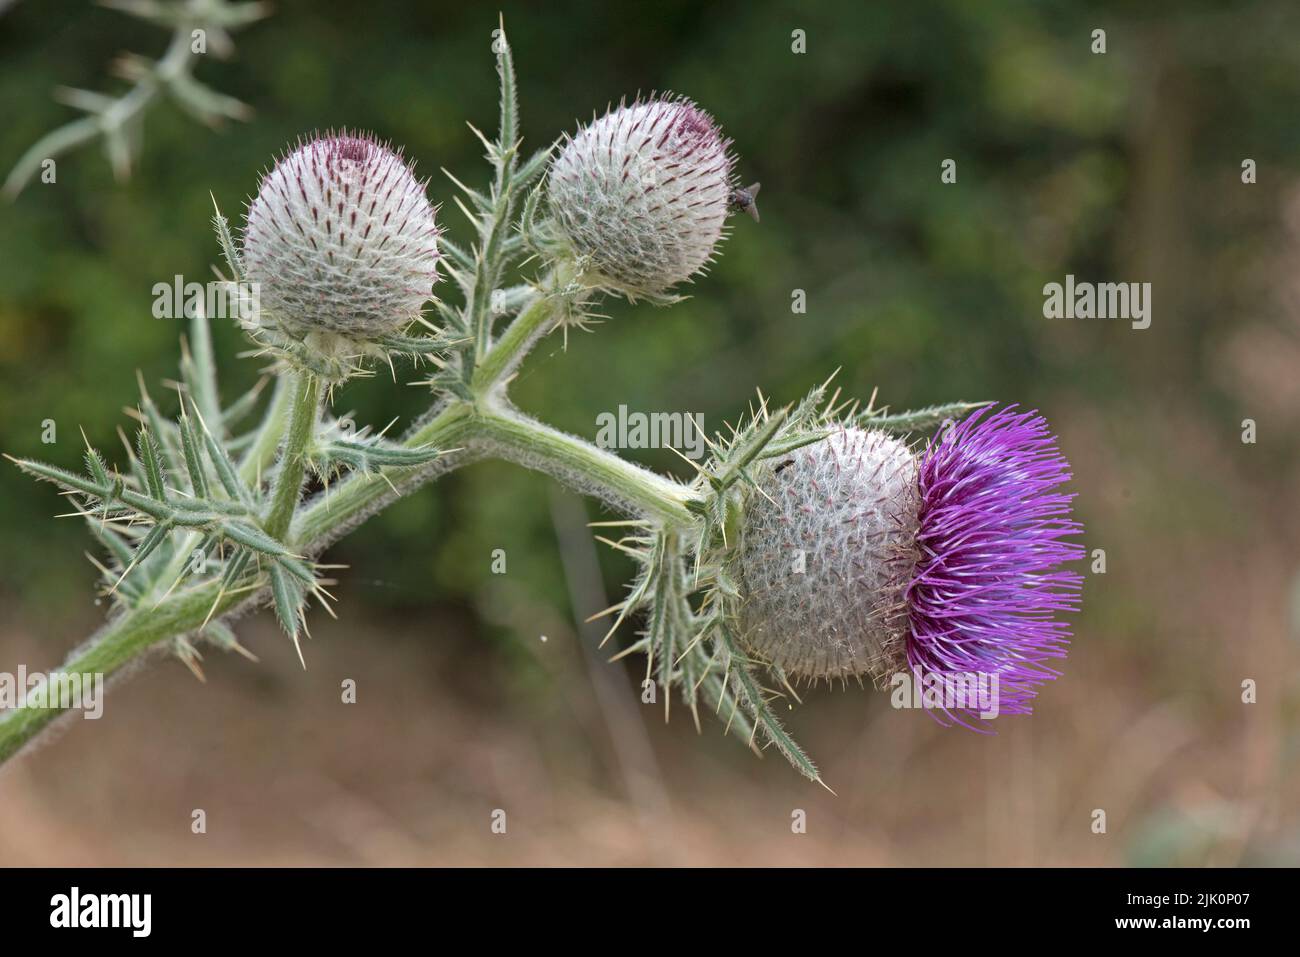 Woolly thistle (Cirsium eriophorum) flowering with purple disc florets on a tall spiny leaved plant and unopened buds, Berkshire, July. Stock Photo